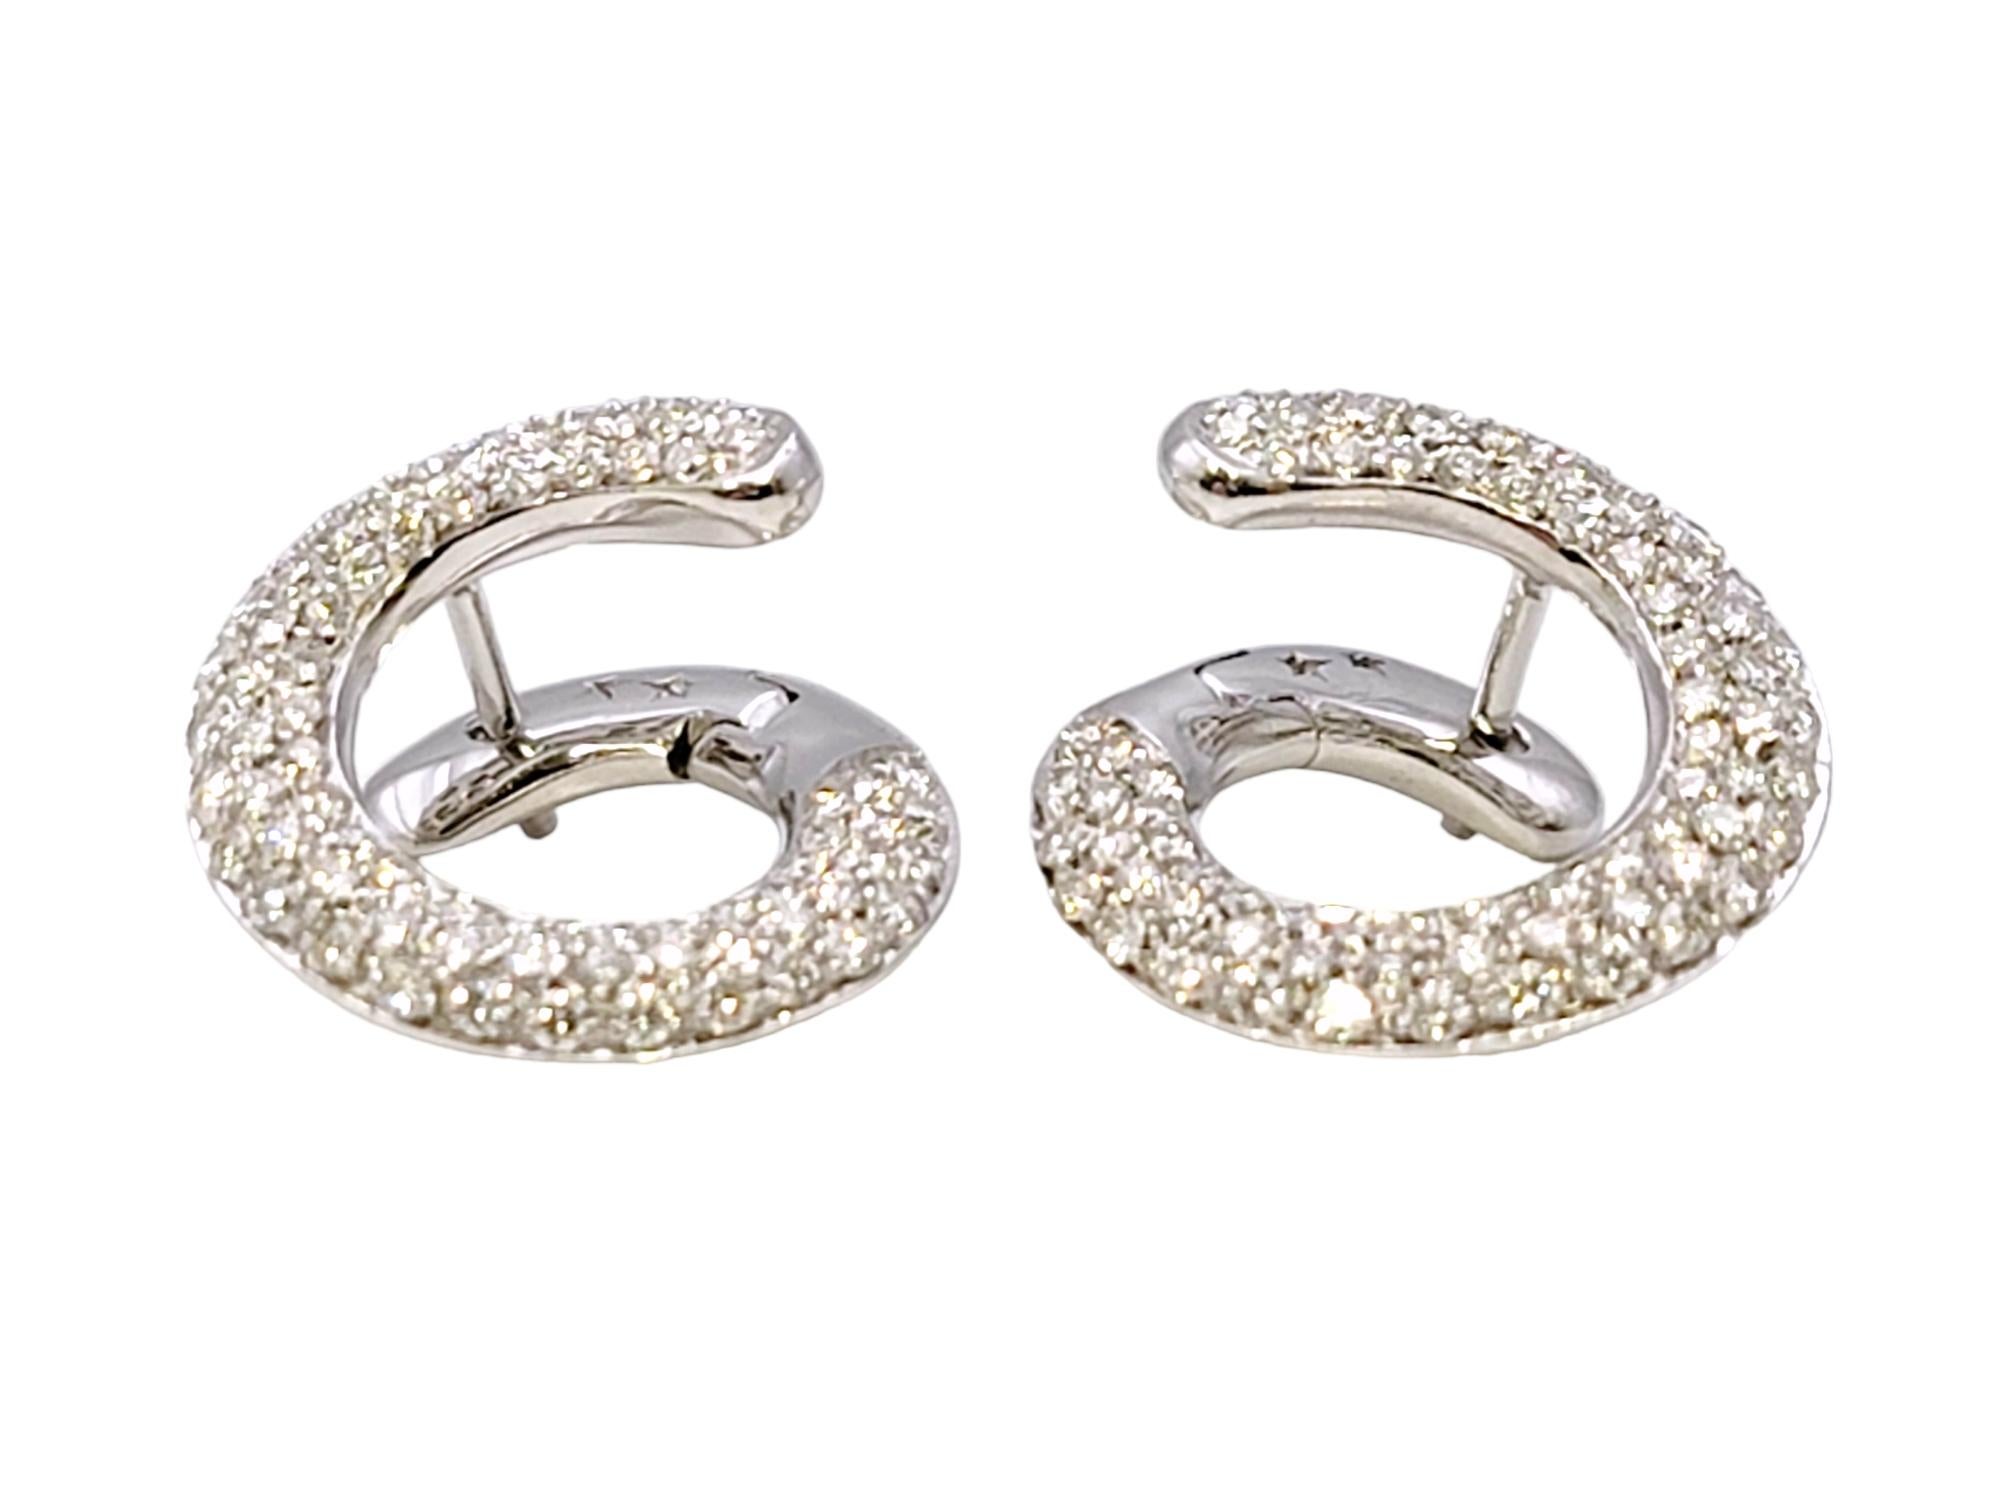 These super sparkly diamond swirl earrings absolutely glow. The playful modern design pops beautifully on the lobe, giving an understated yet glamorous look. 

These gorgeous earrings feature shimmering natural diamonds set throughout a single